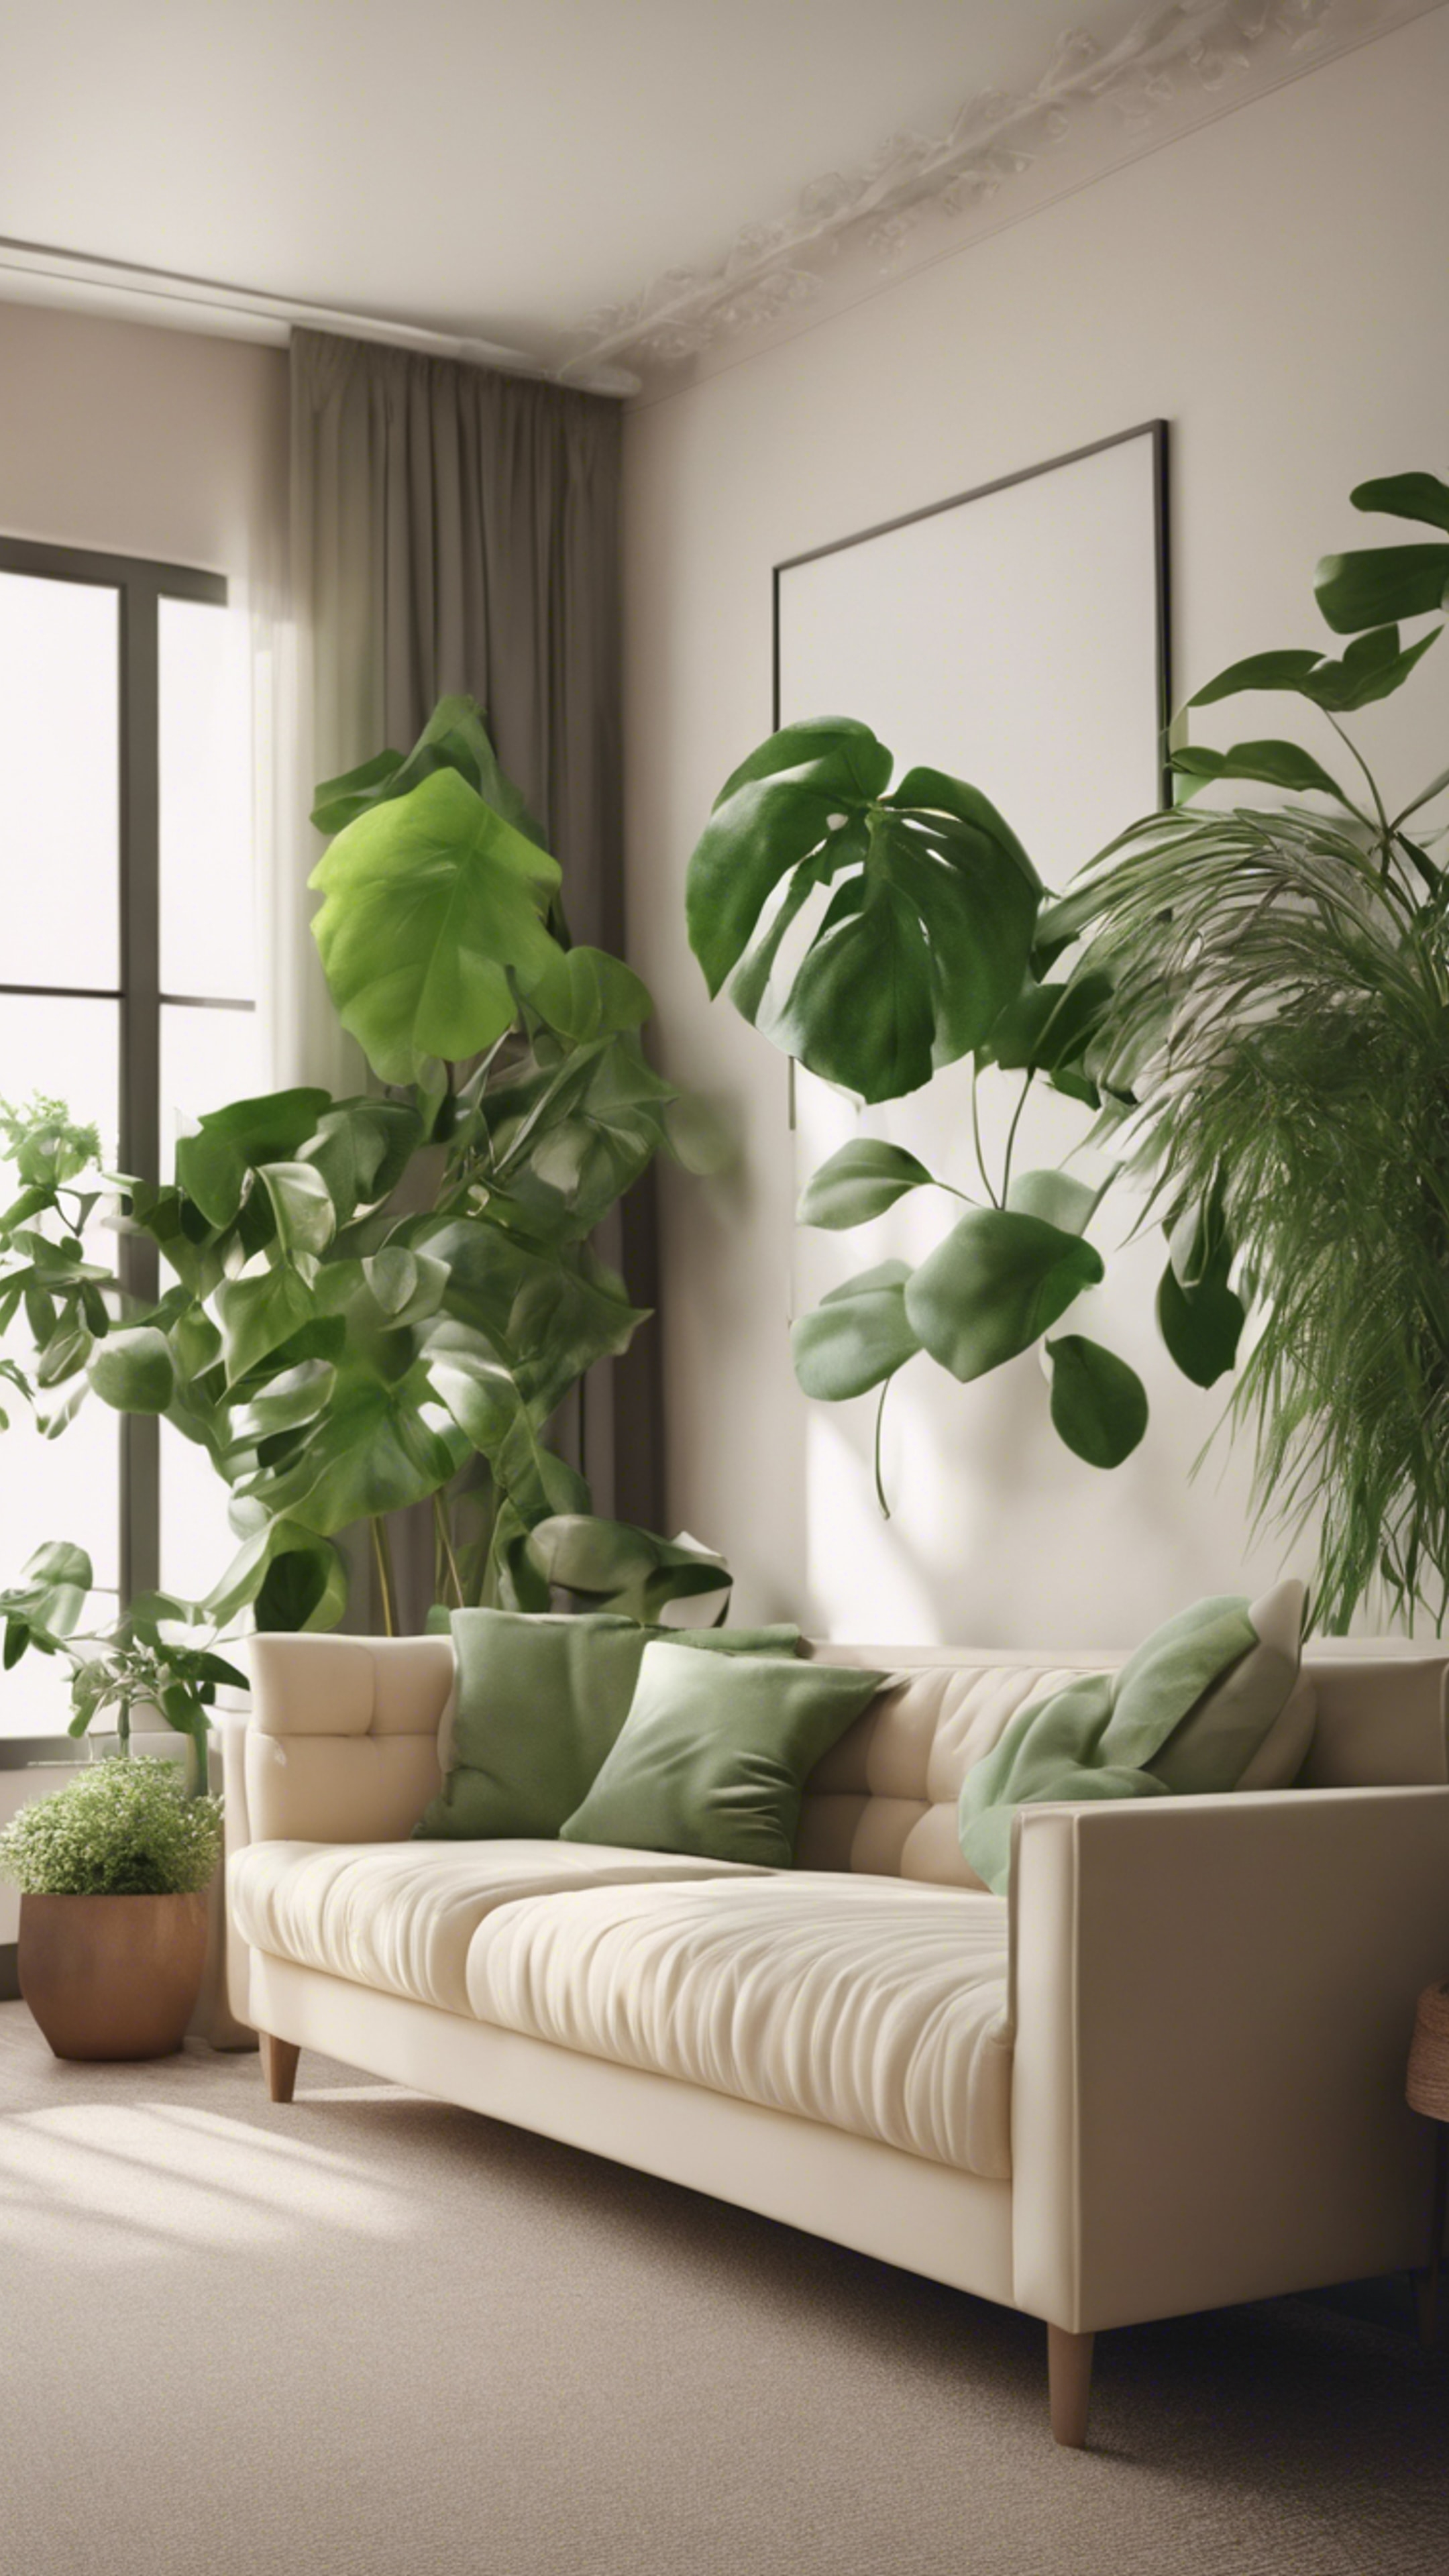 A simplistic living room featuring a cream couch contrasted with a natural green aesthetic of indoor plants壁紙[57c4f329650745189cc4]